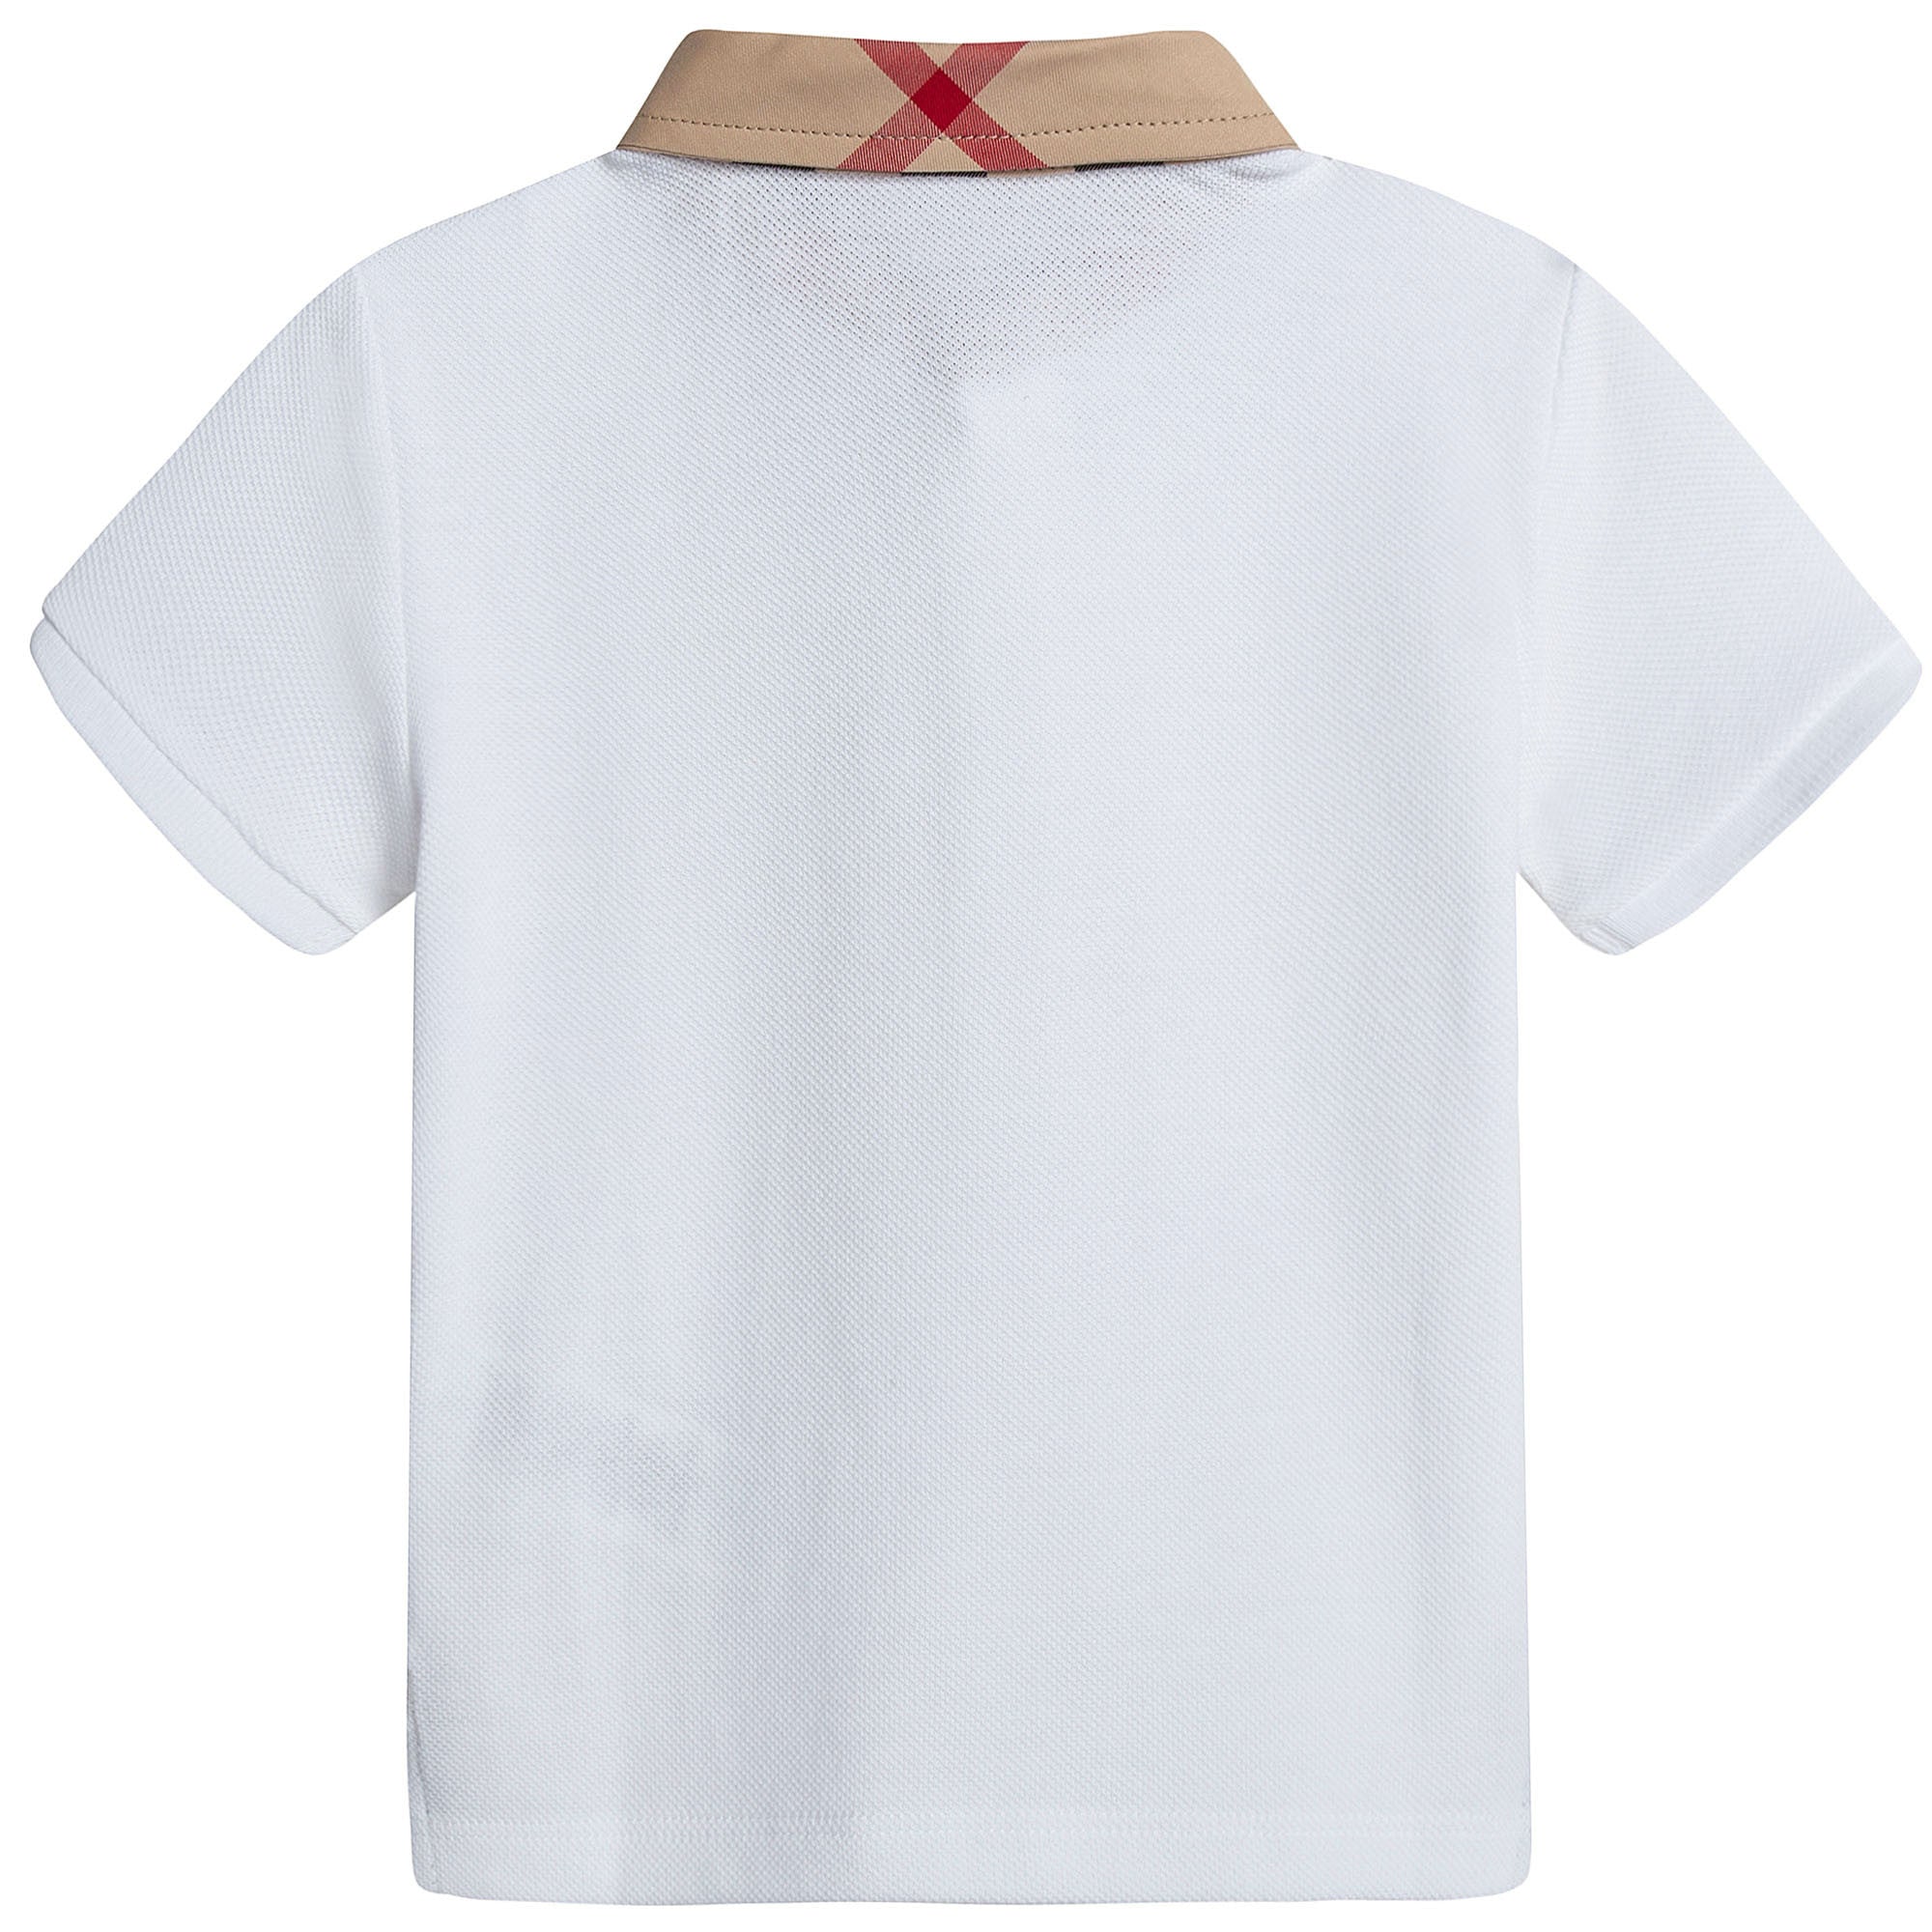 Baby Boys White Polo Shirt With Checked Collar - CÉMAROSE | Children's Fashion Store - 2